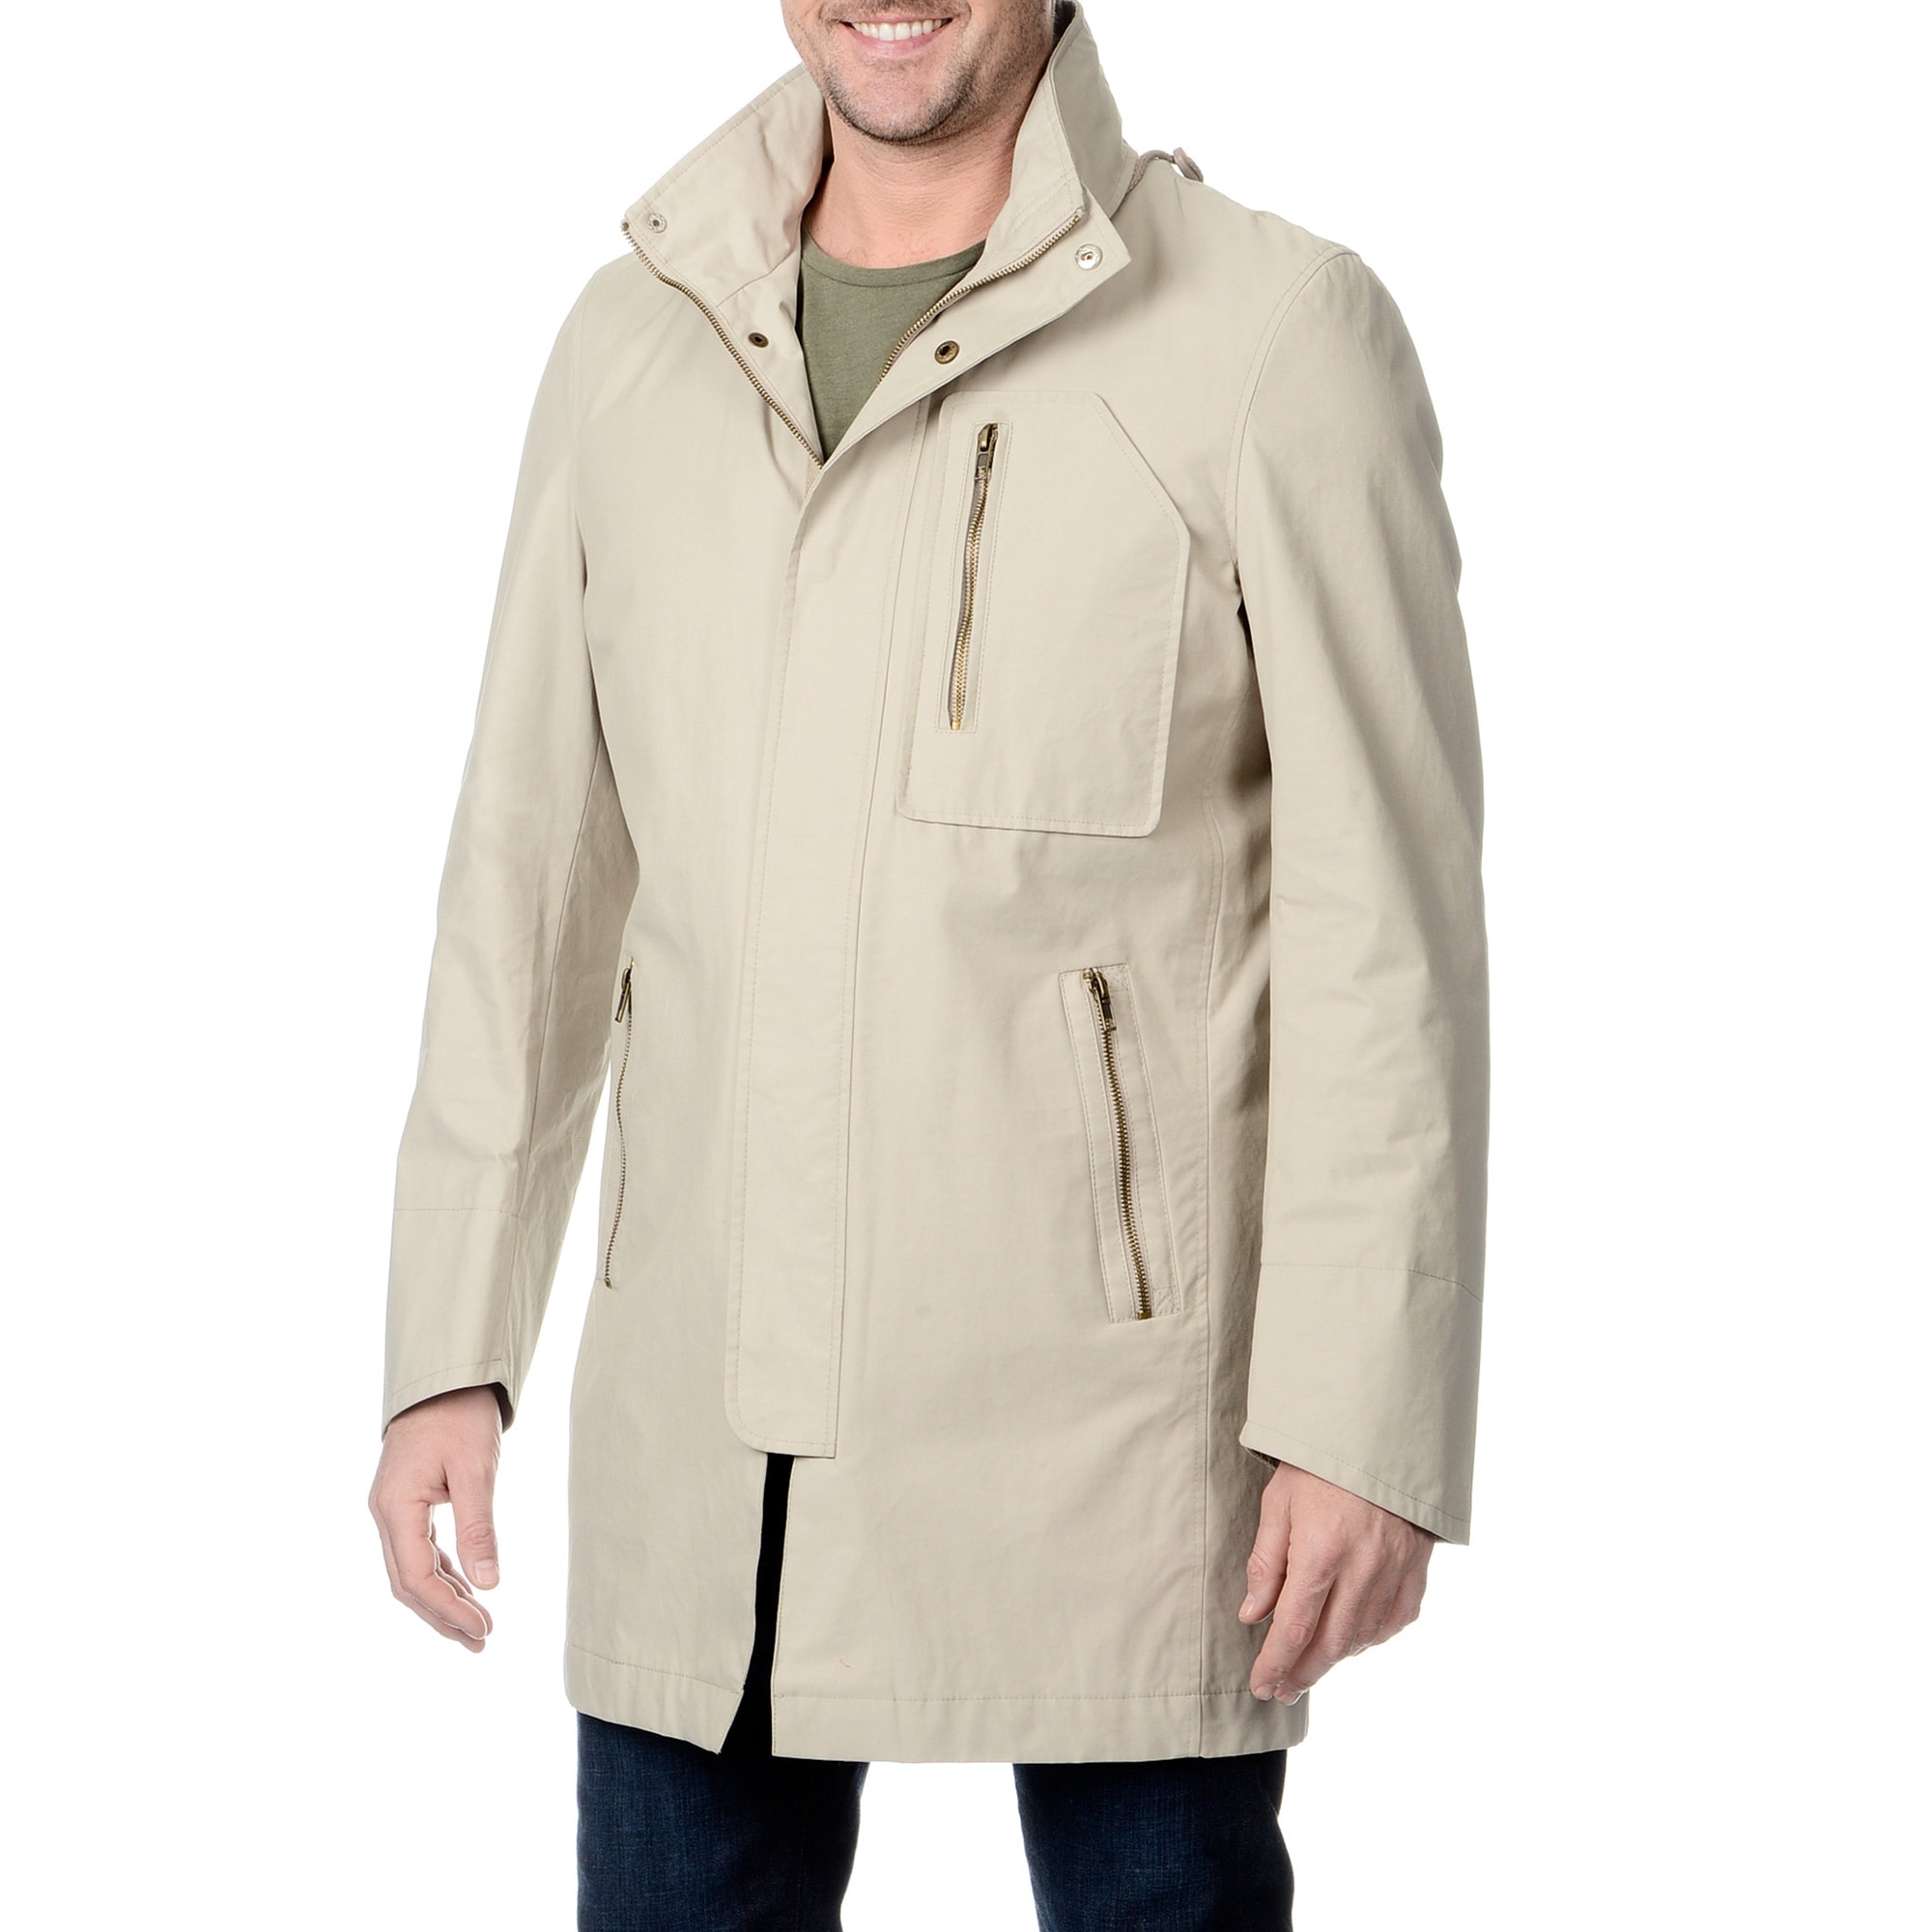 Nautica Nautica Mens Stone Hooded Raincoat With Removable Lining Tan Size 38R